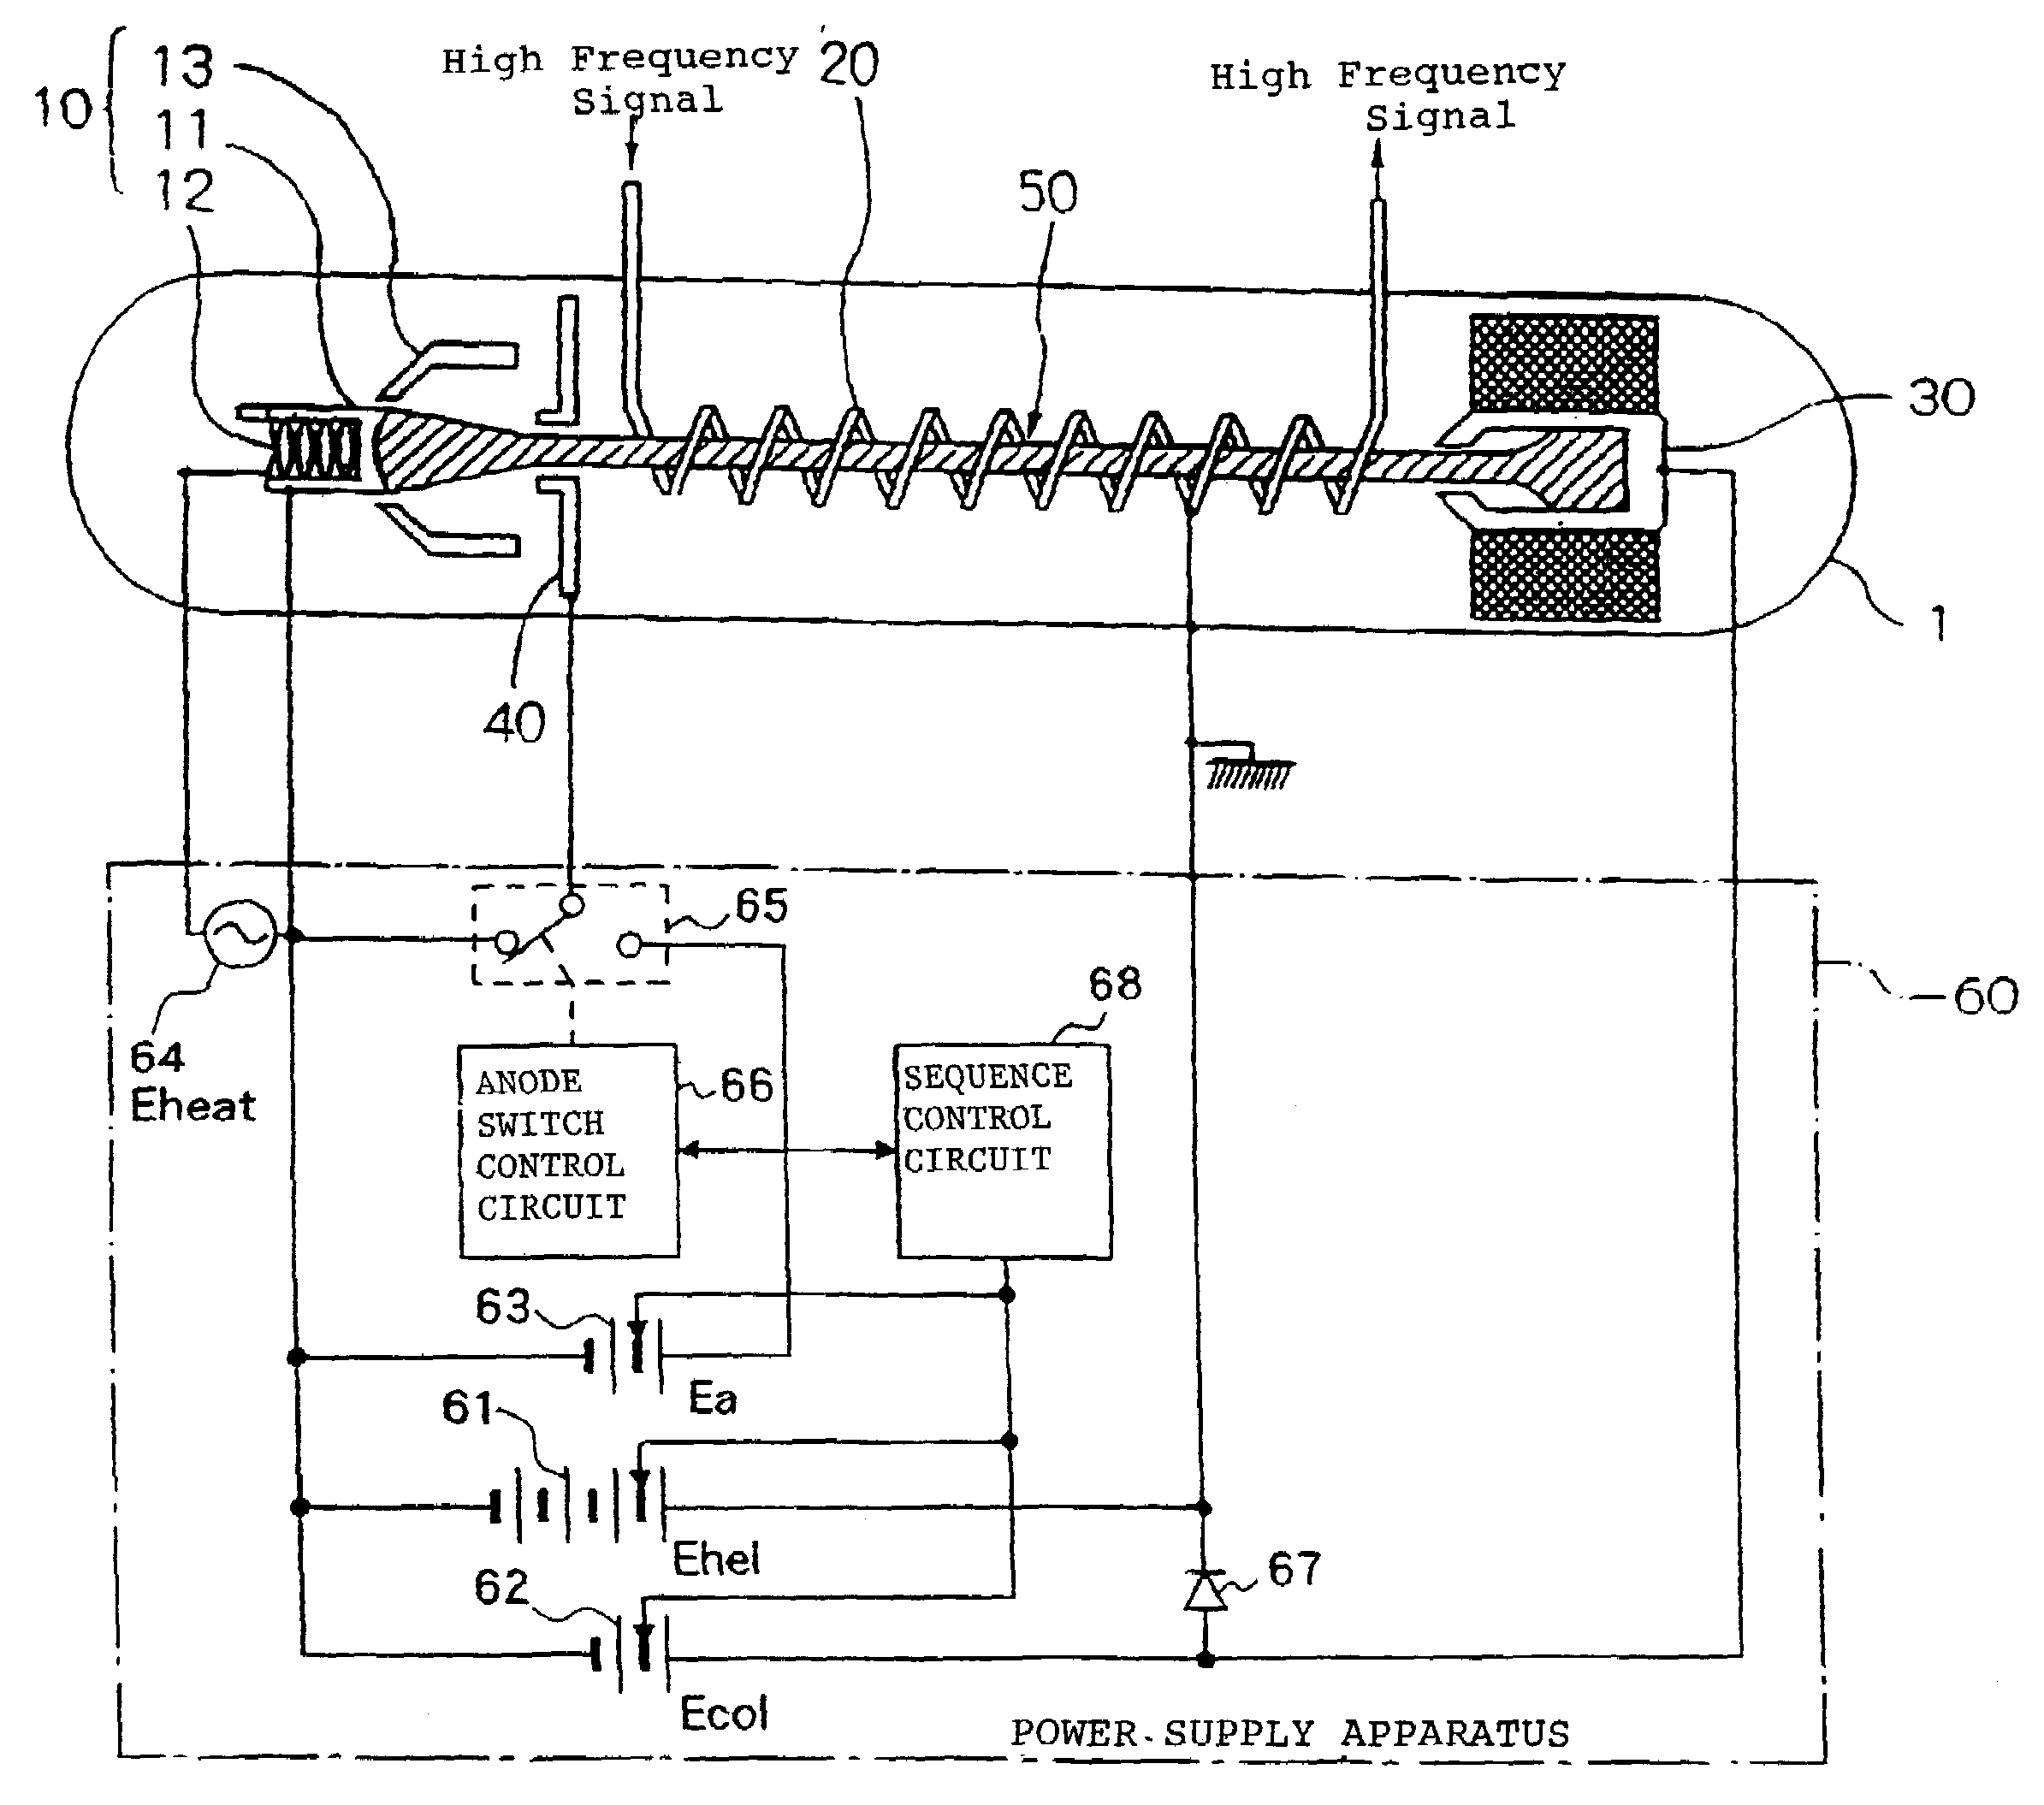 Power supply apparatus and high frequency circuit system